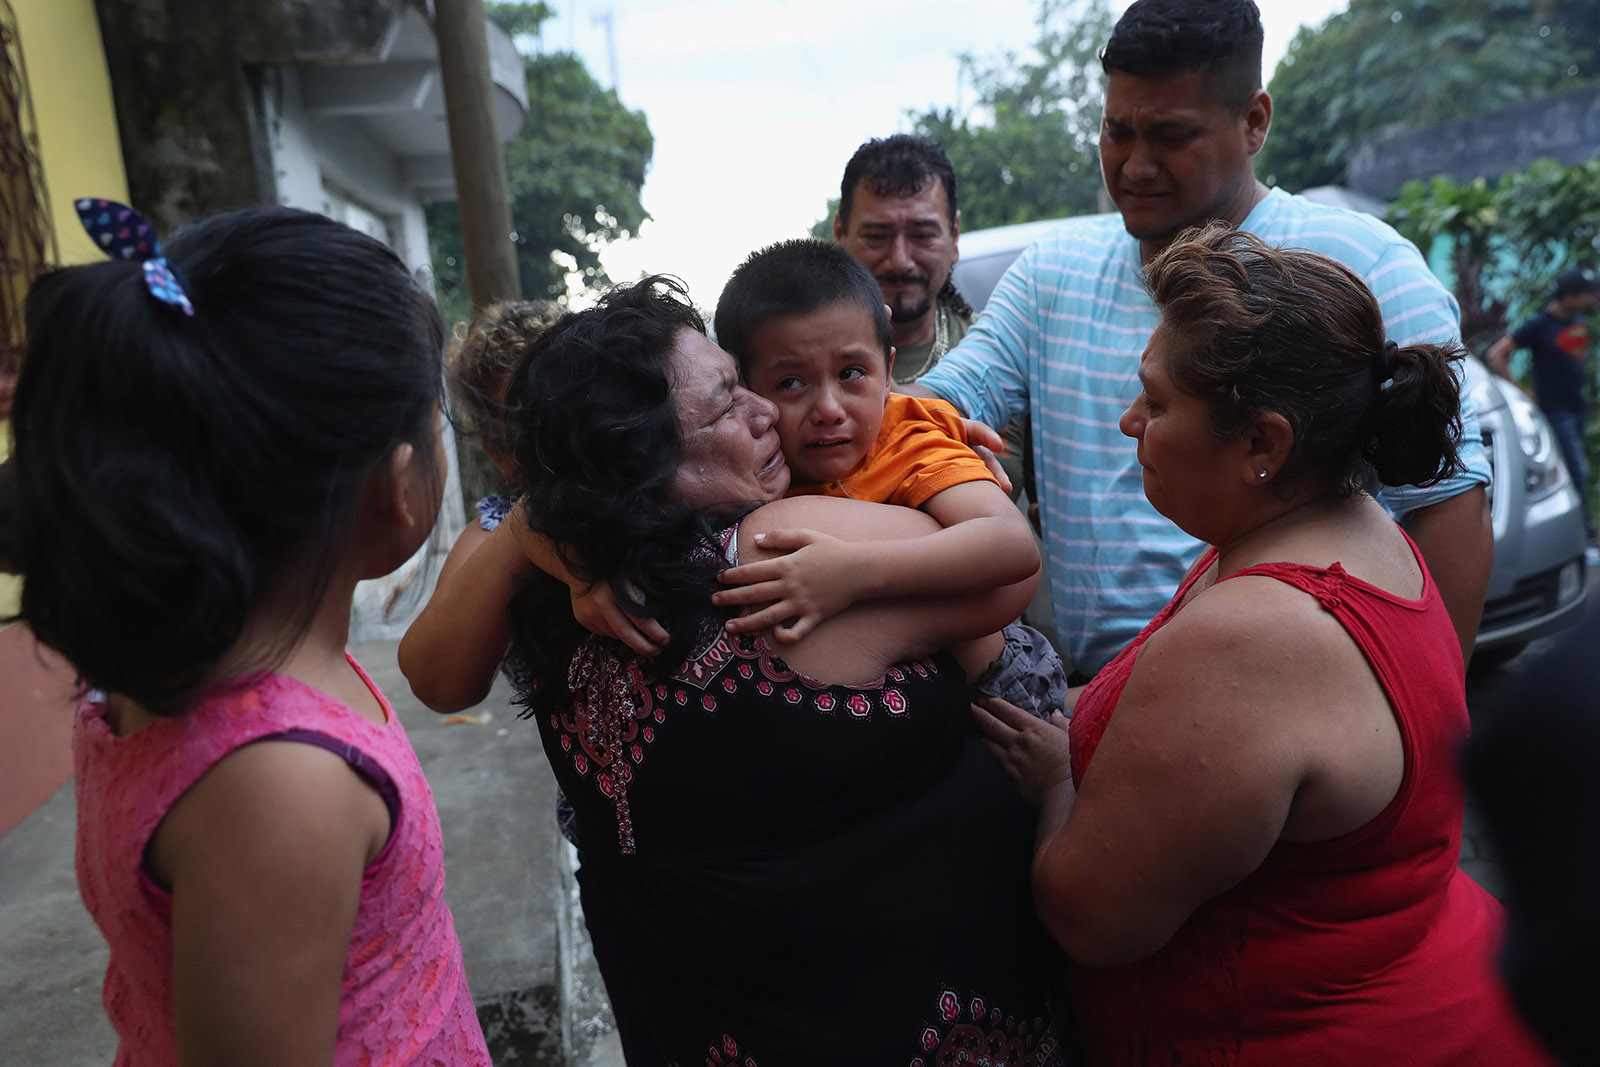 Family members welcoming home six-year-old Leo Jeancarlo de Leon, who had been separated from his mother, Lourdes de Leon, for nearly three months after they were detained by Border Patrol in the US, San Marco, Guatemala, August 8, 2018